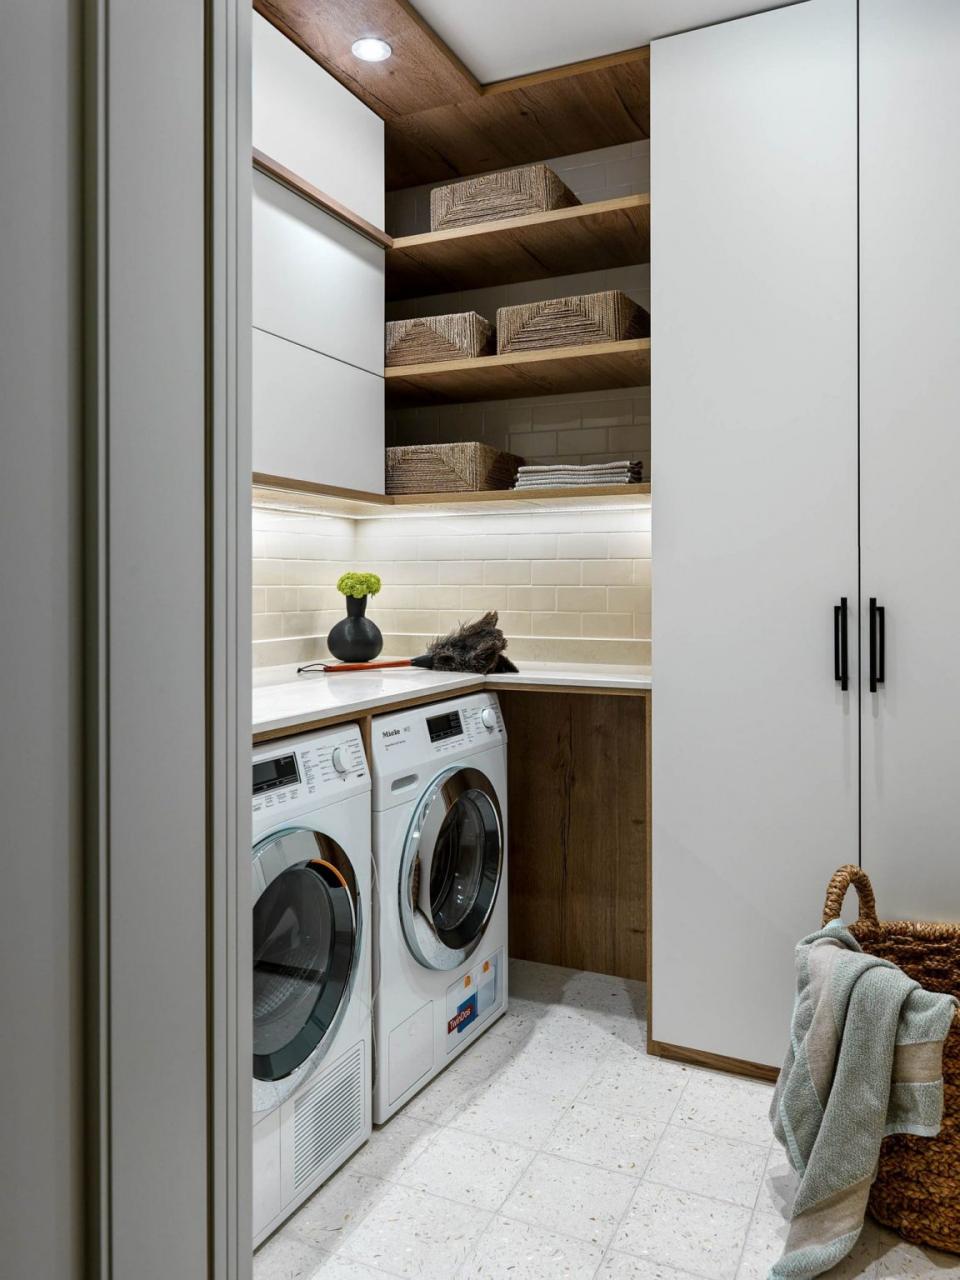 45 Small Laundry Room Ideas To Make the Most of Your Space